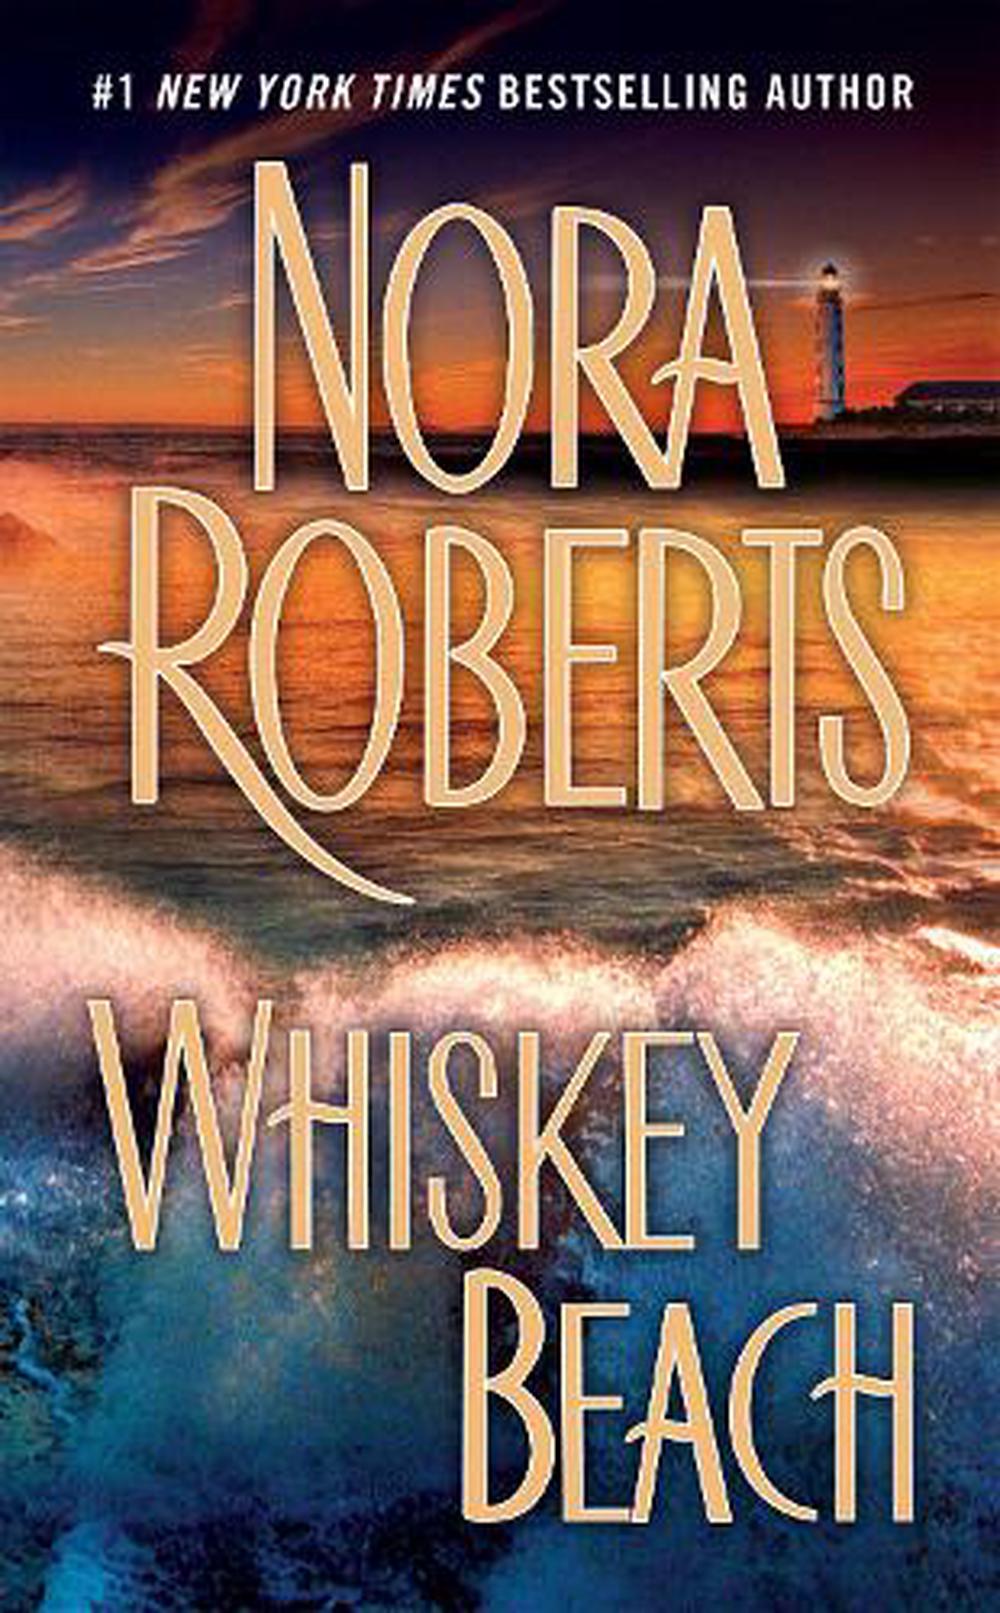 Whiskey Beach by Nora Roberts, Paperback, 9780515154290 Buy online at